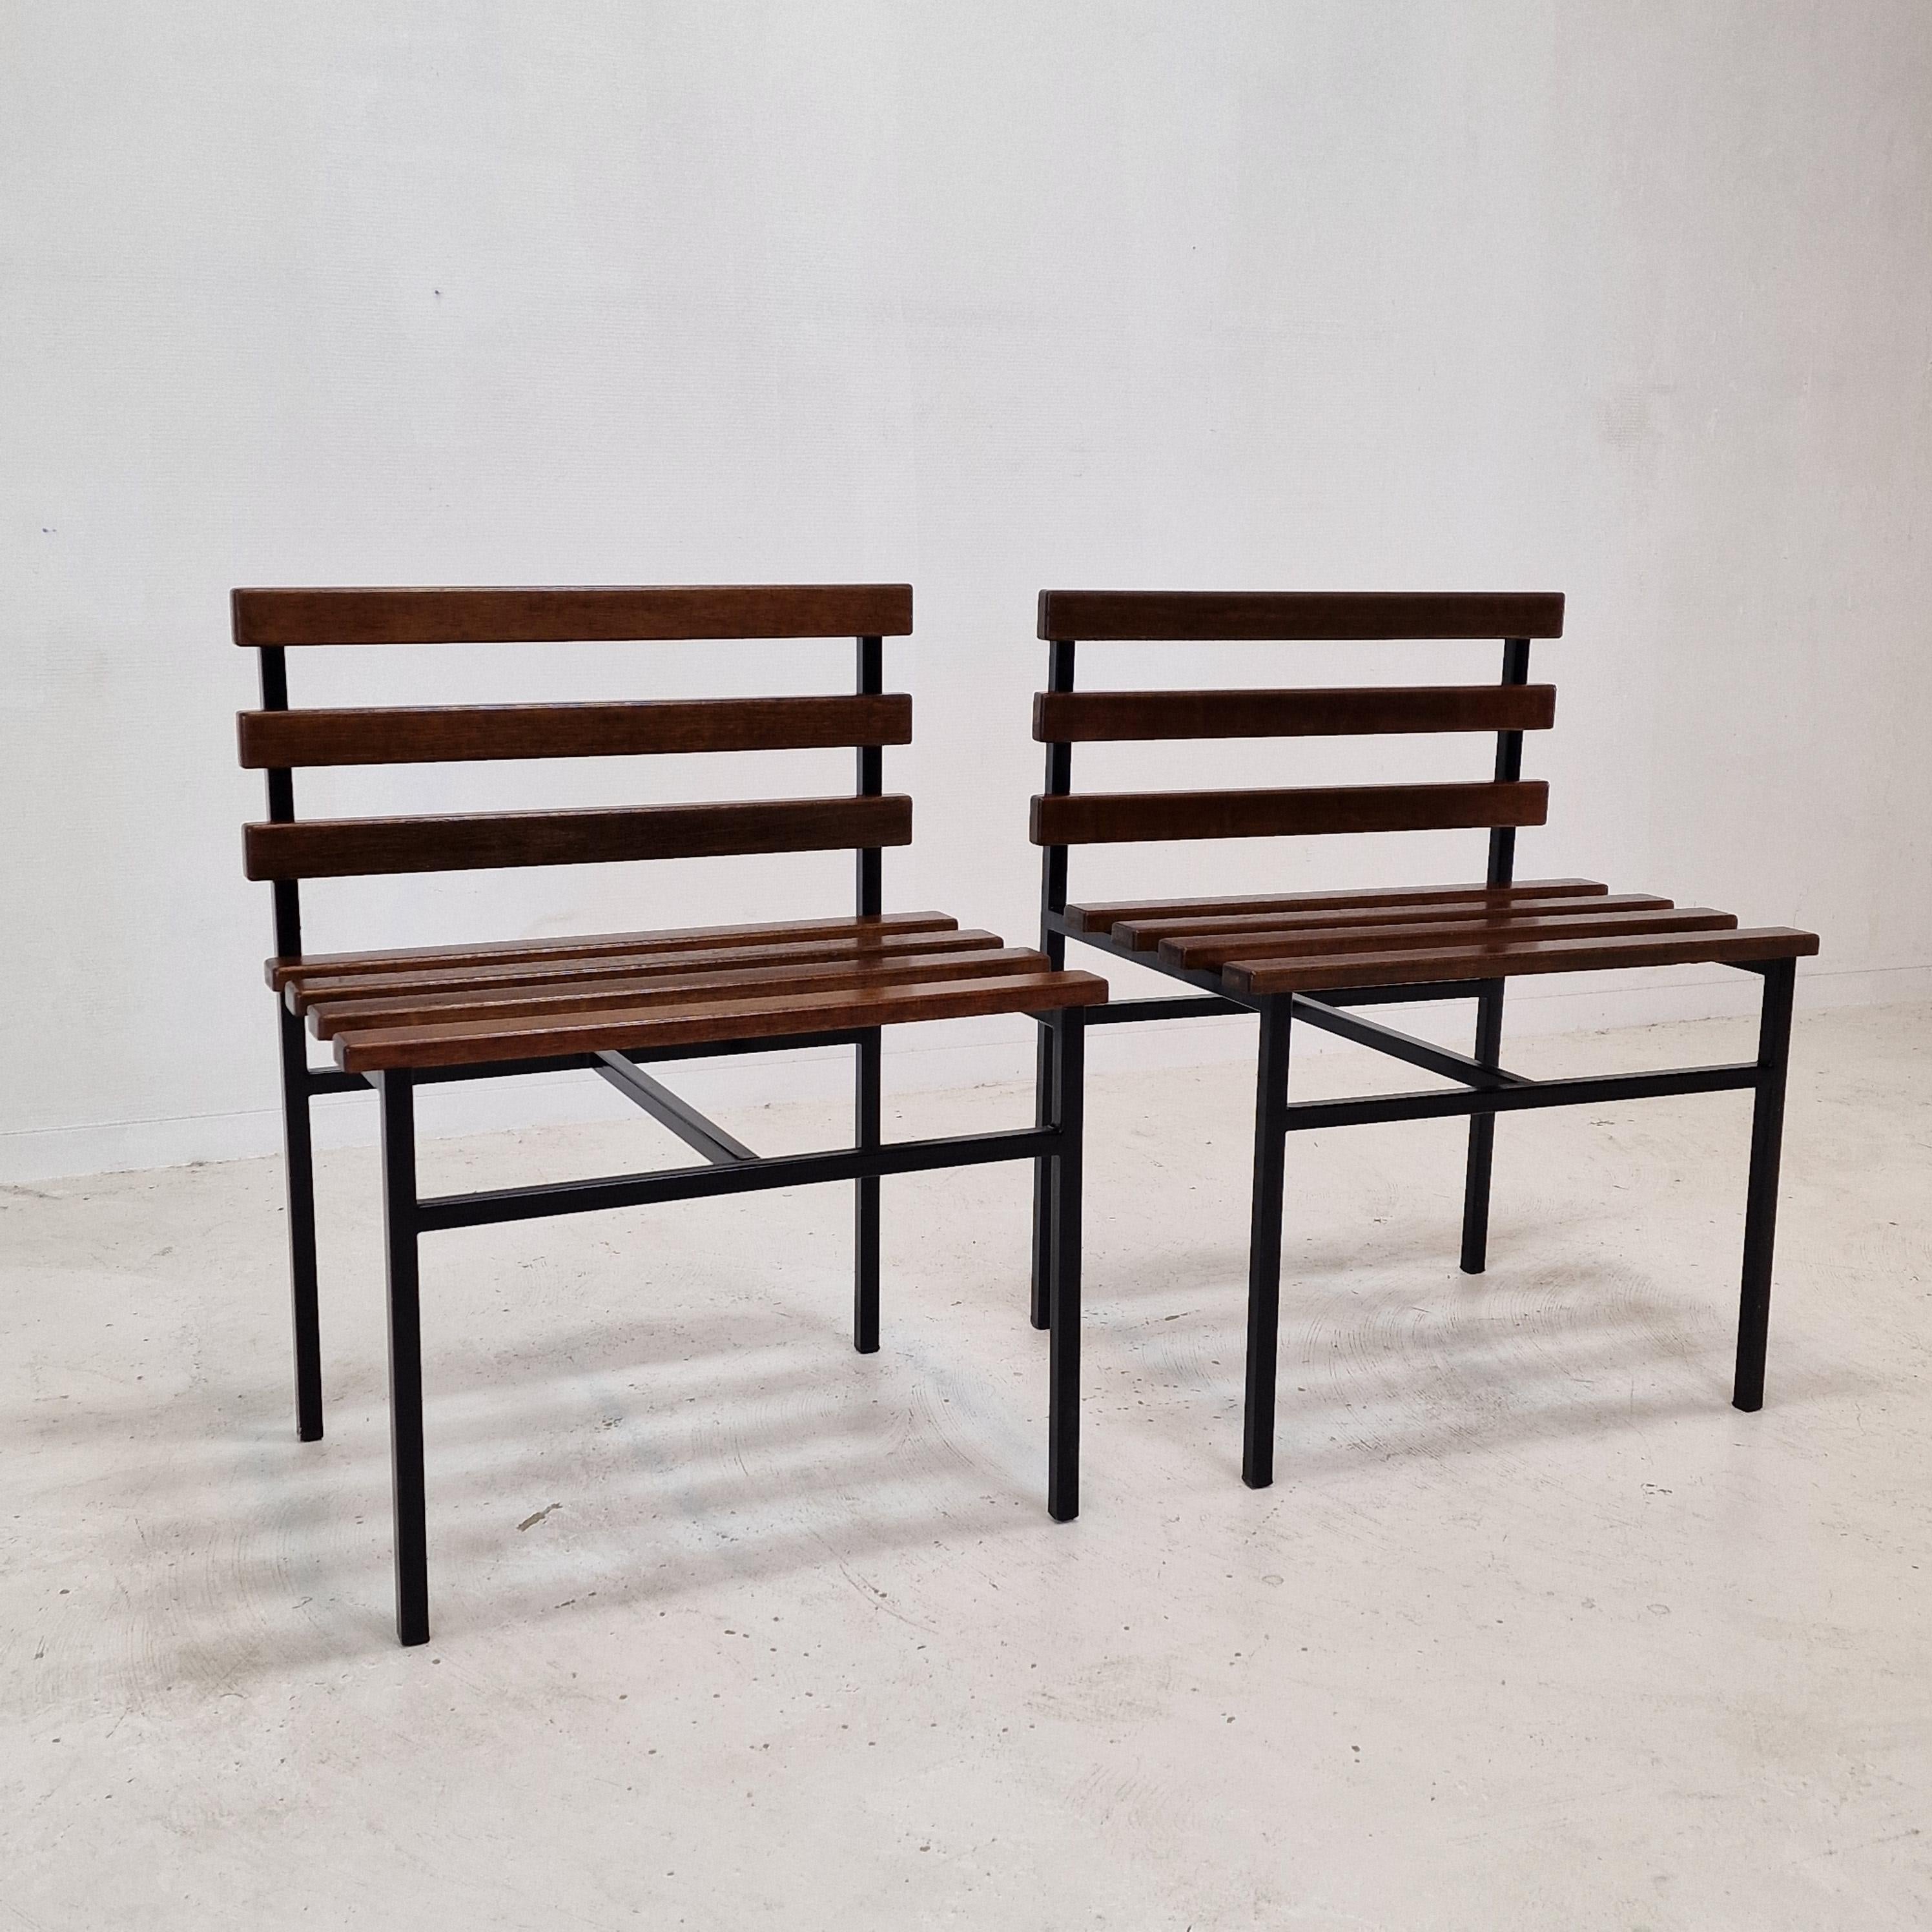 Midcentury Set of 2 Chairs or Benches in Teak, Italy, 1960s In Good Condition For Sale In Oud Beijerland, NL